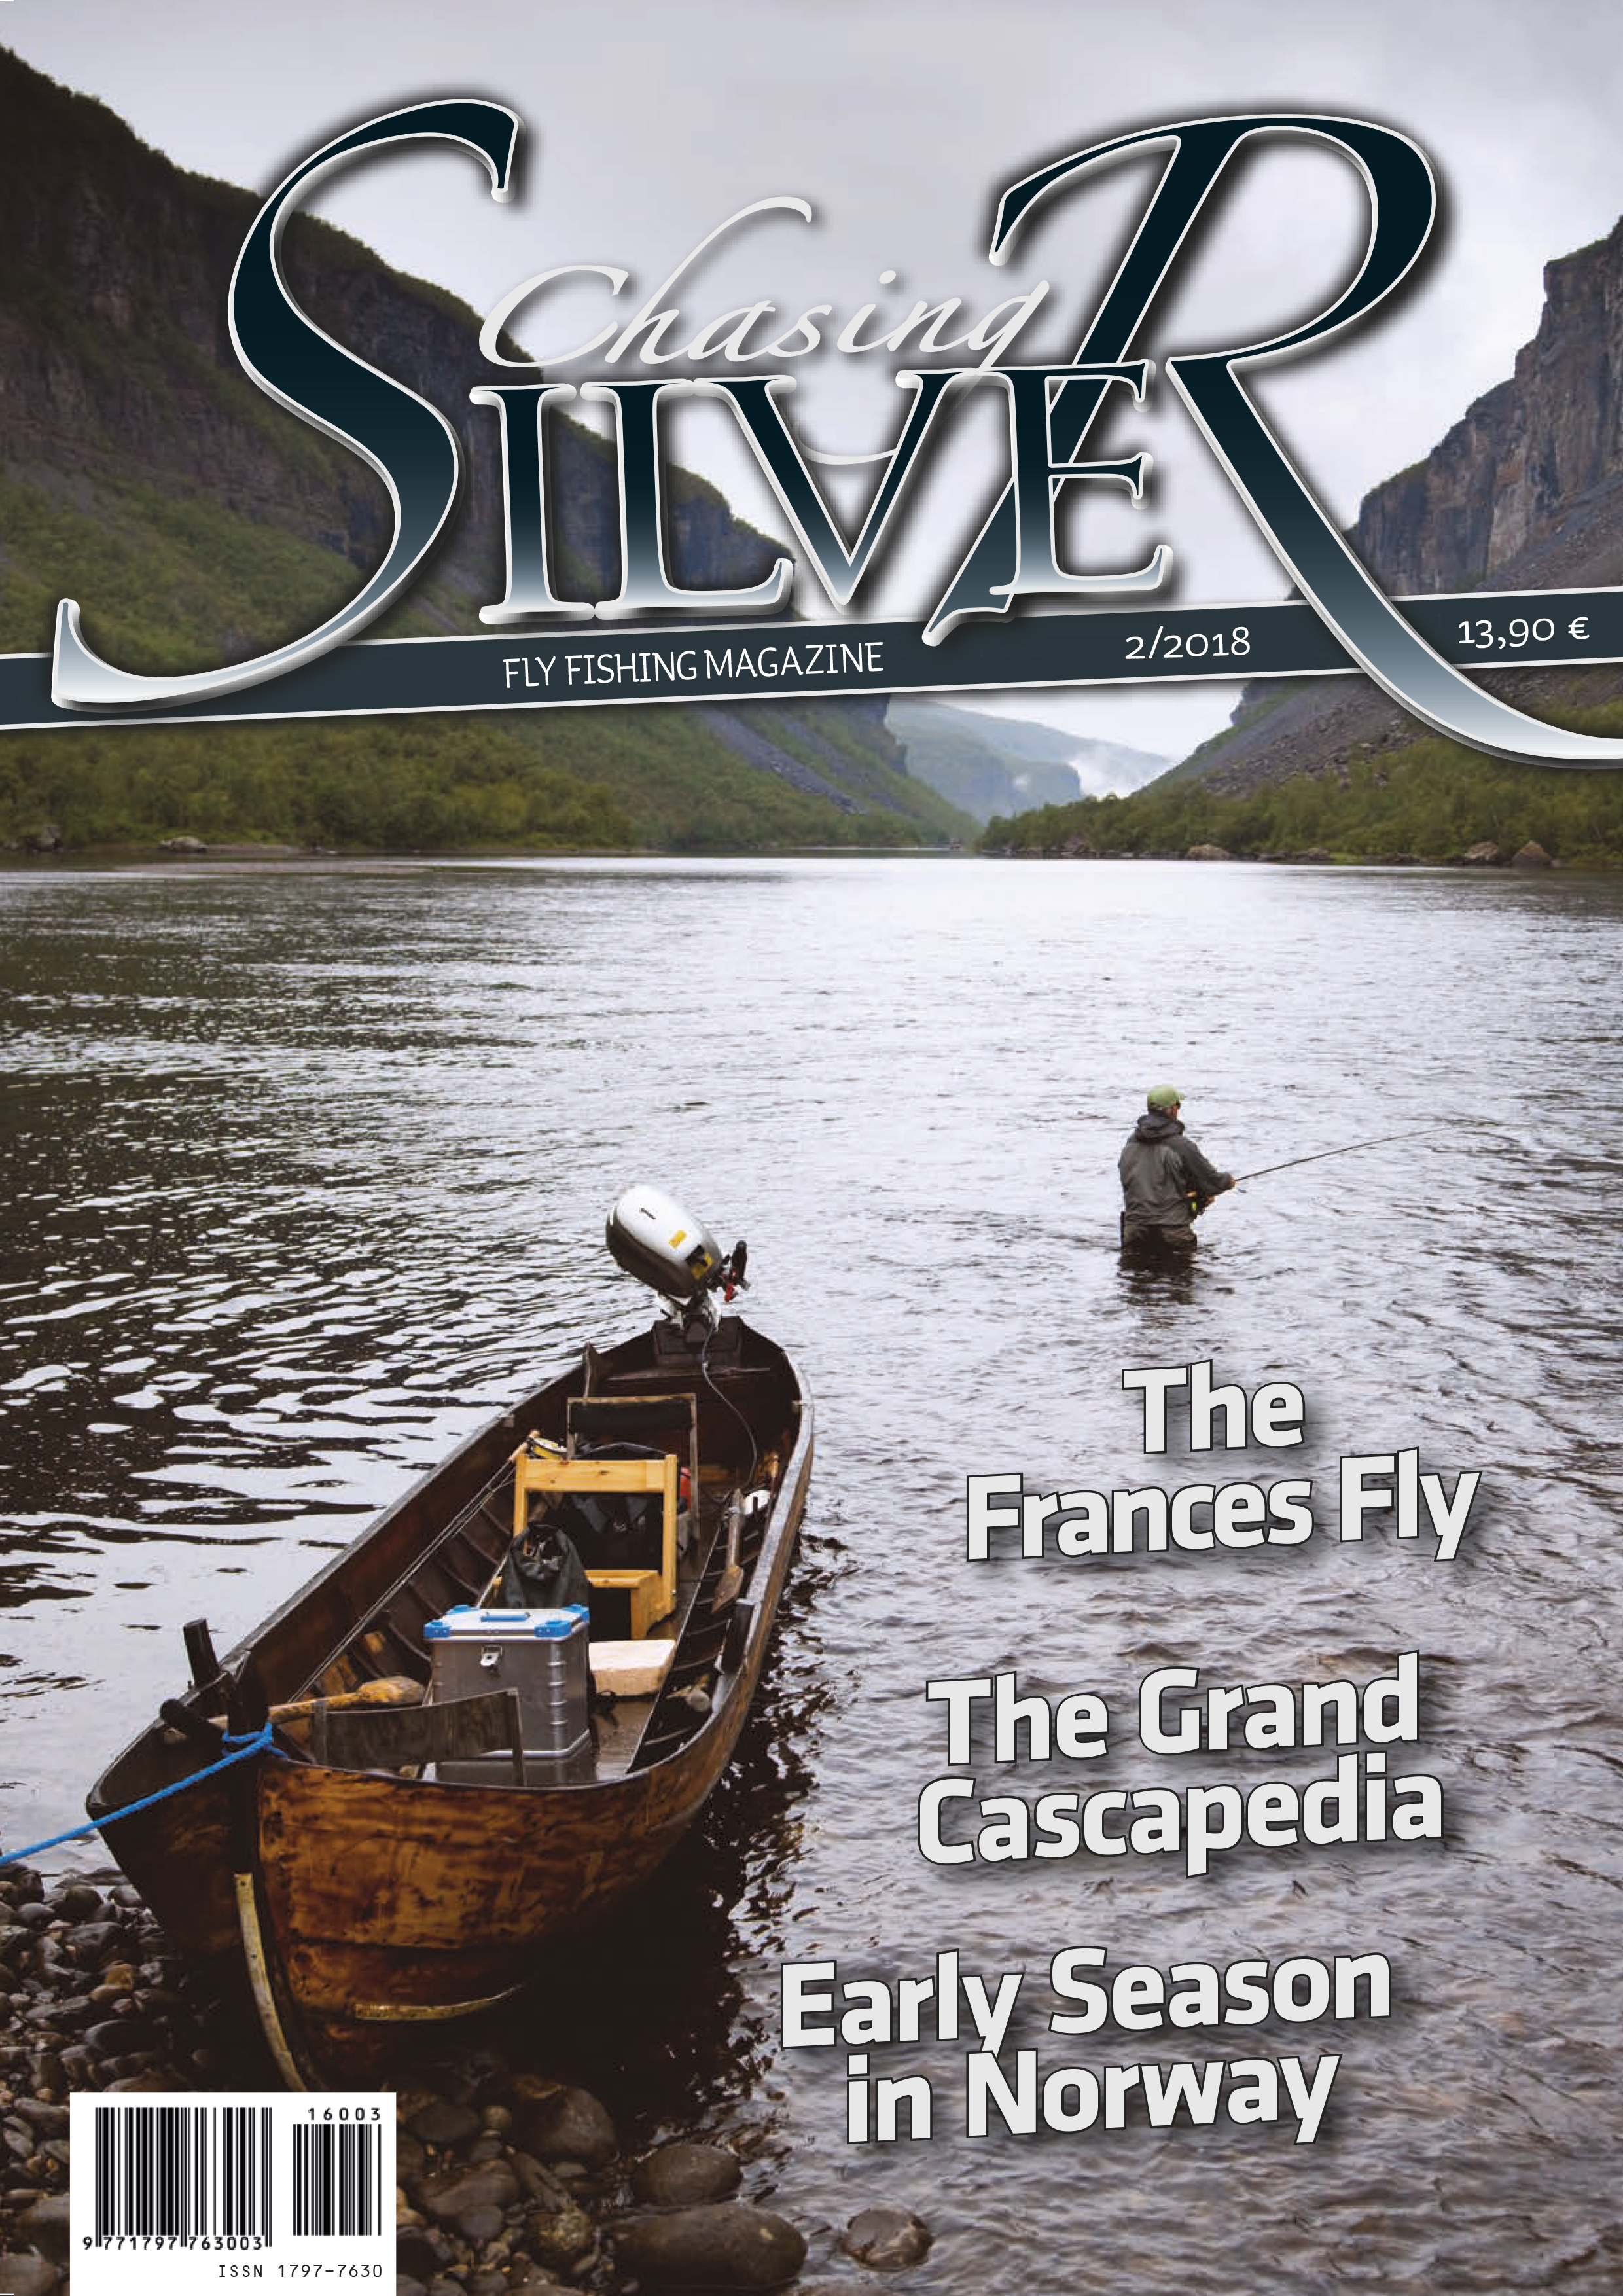 Chasing Silver Magazine – Glasgow Angling Centre